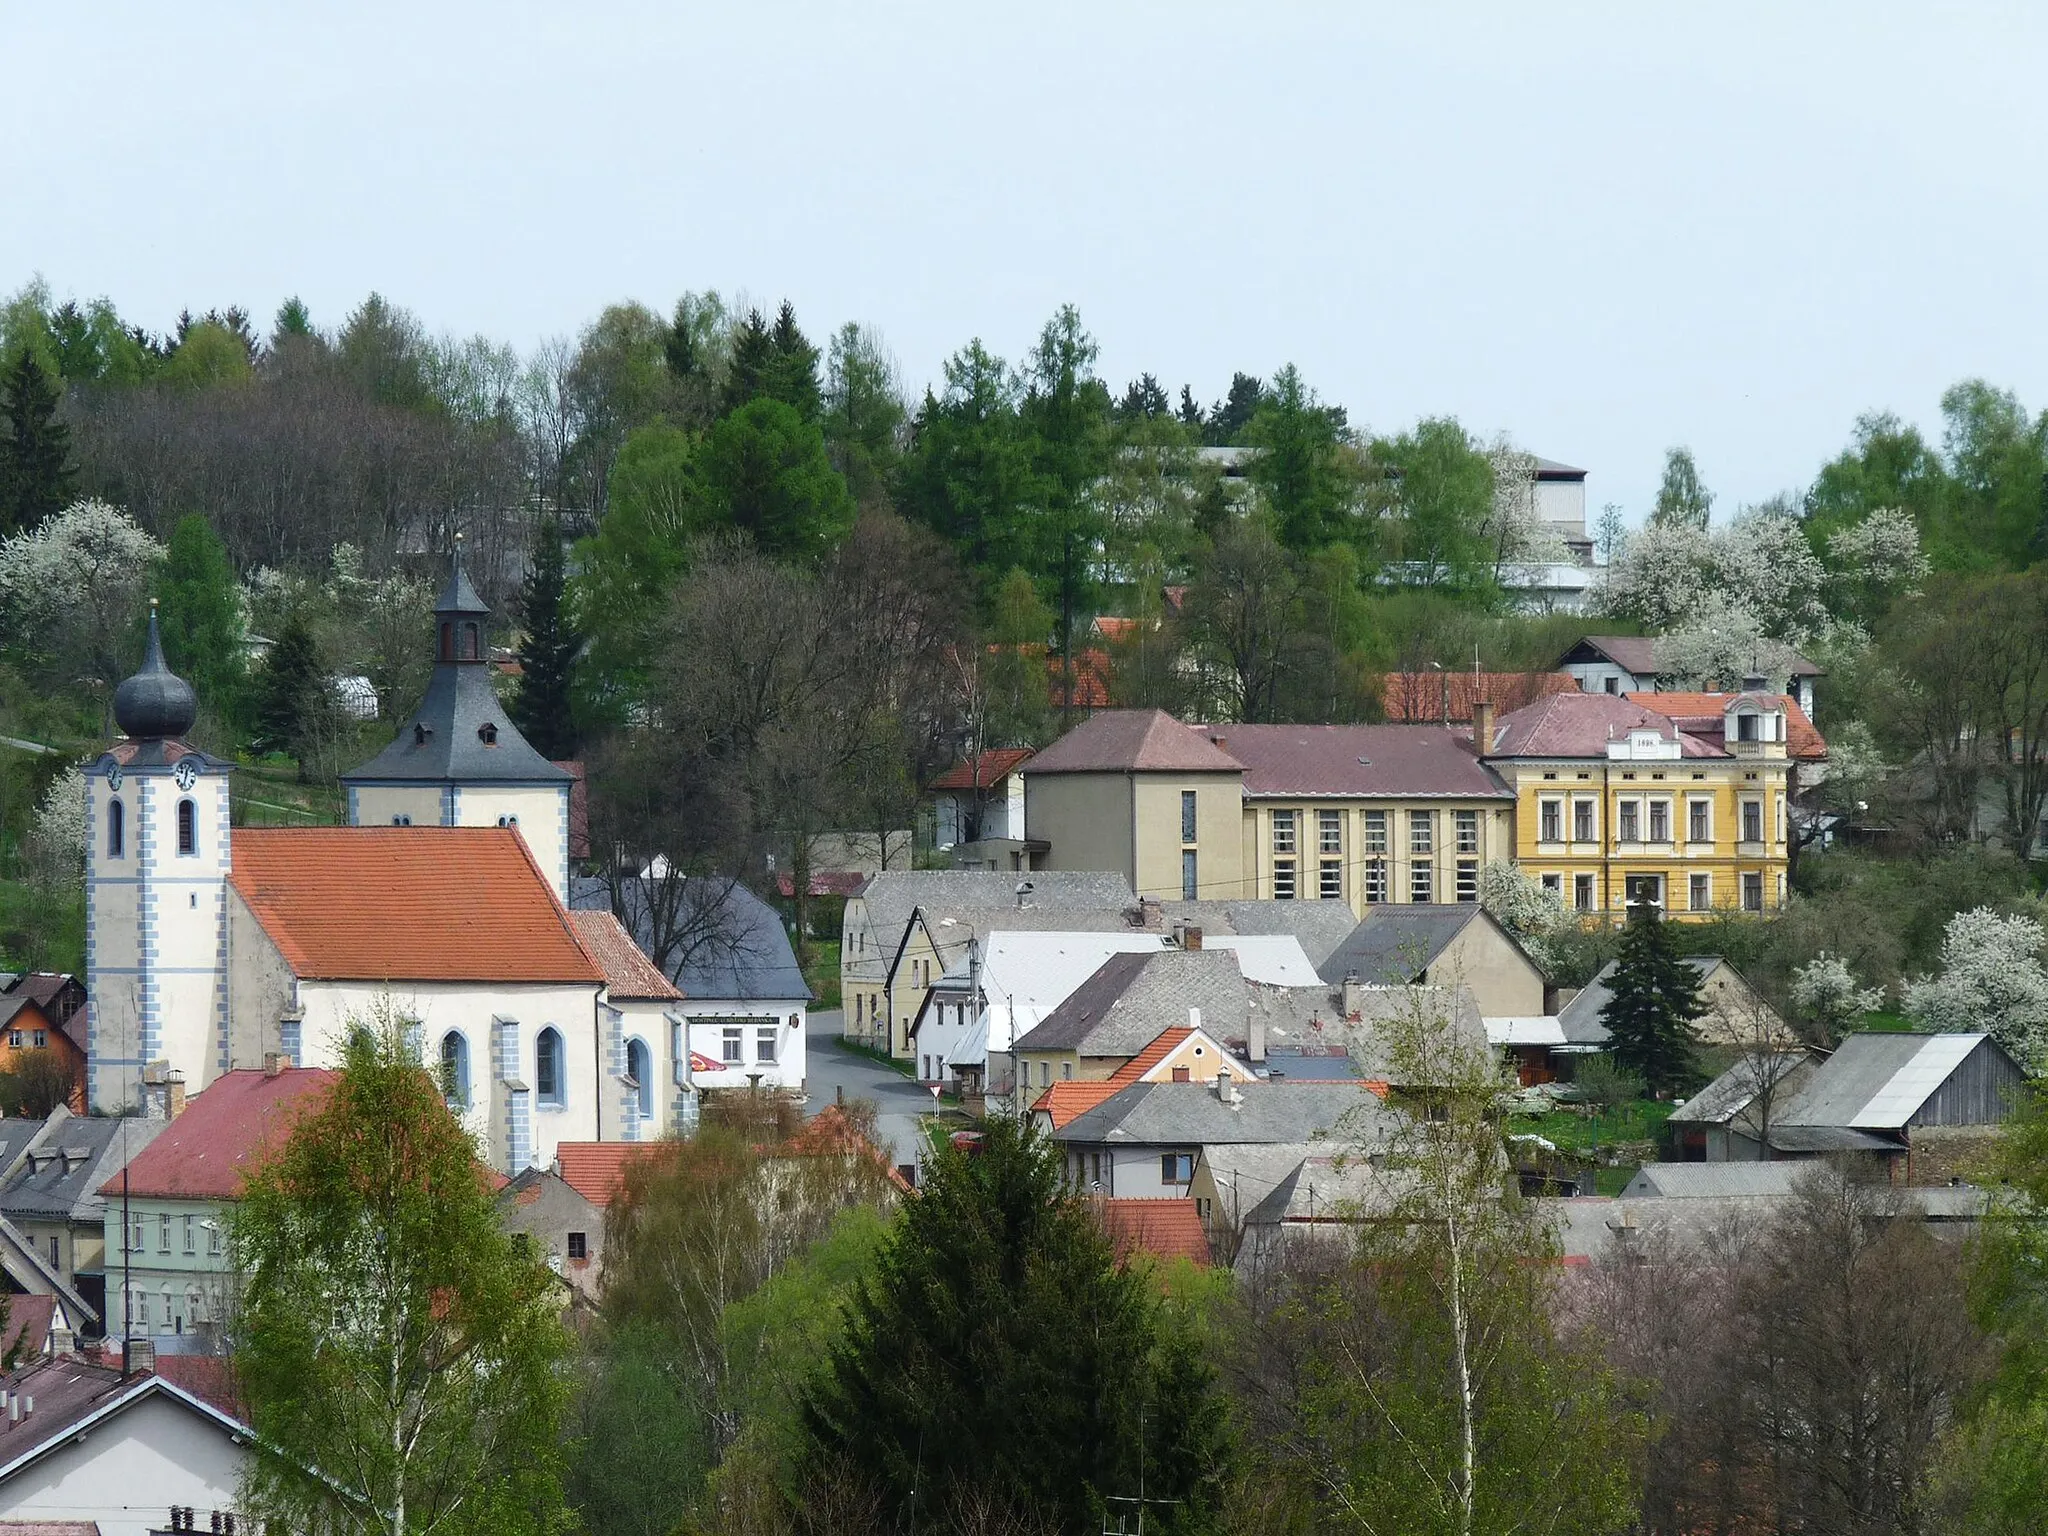 Photo showing: Church of the Nativity of the Virgin Mary and the municipal office building in the village of Velhartice, Klatovy District, Czech Republic